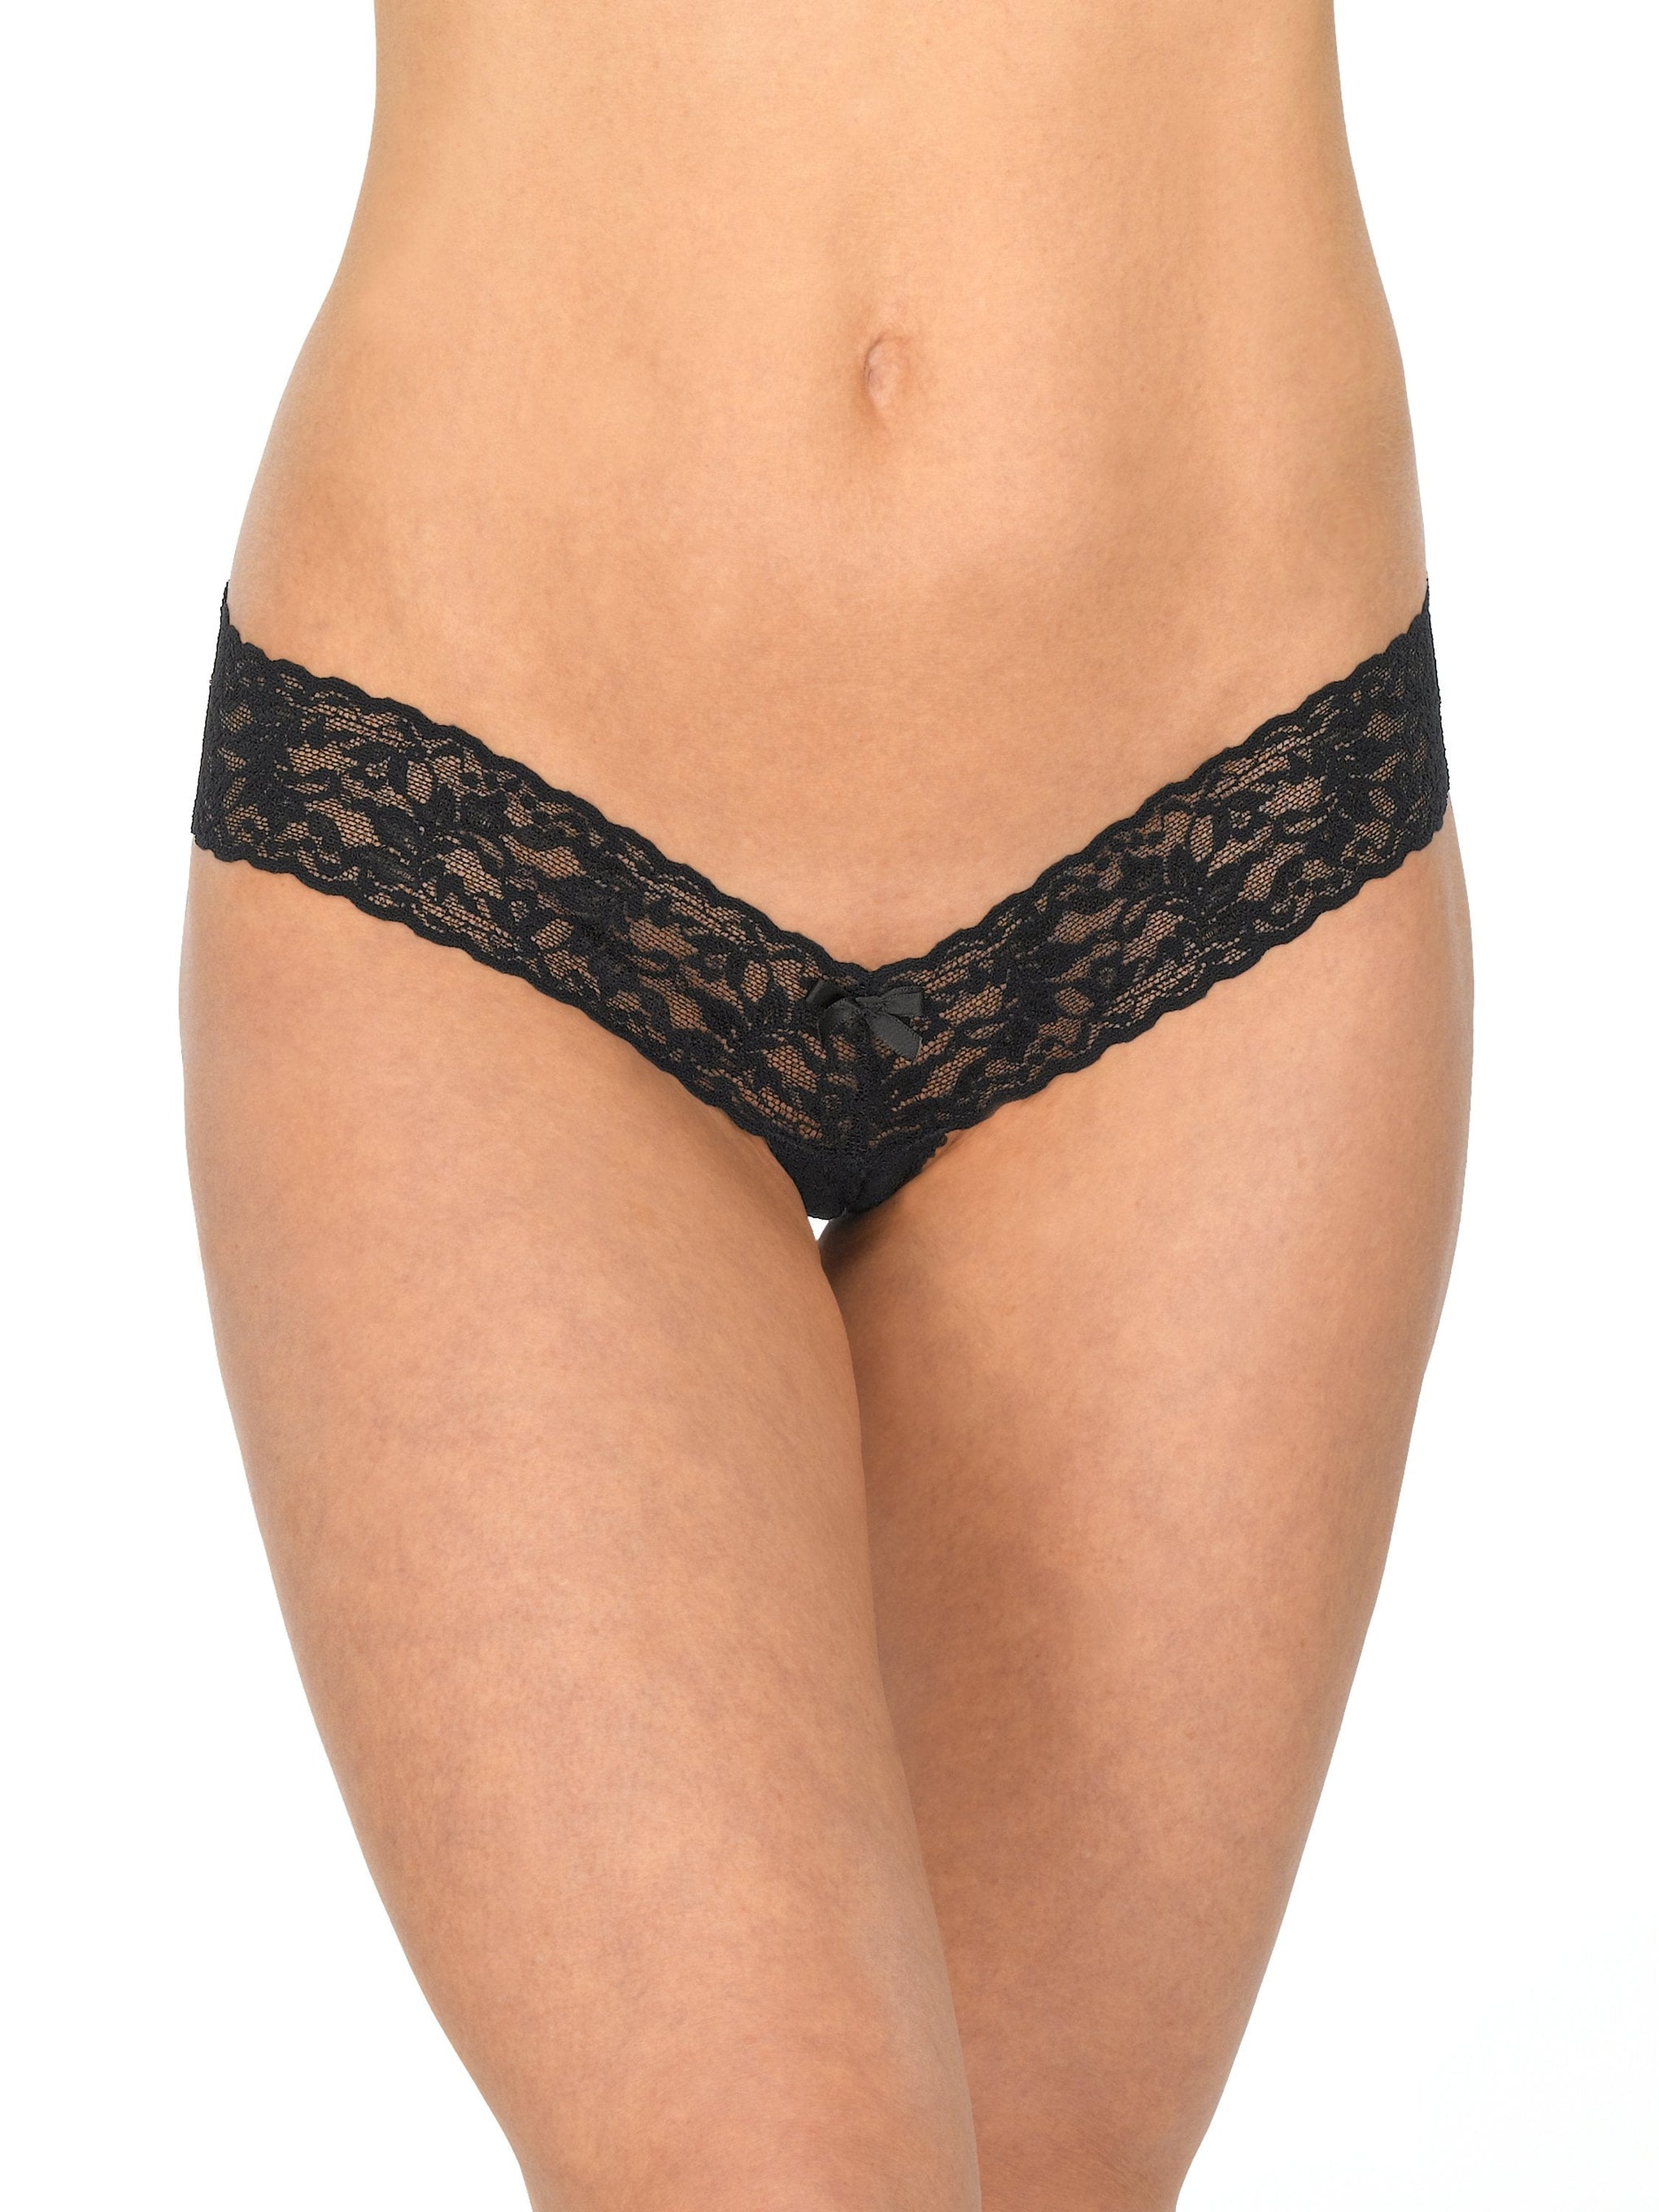 Buy Lacy Line Women's Plus Size Lingerie Crotchless Panties with